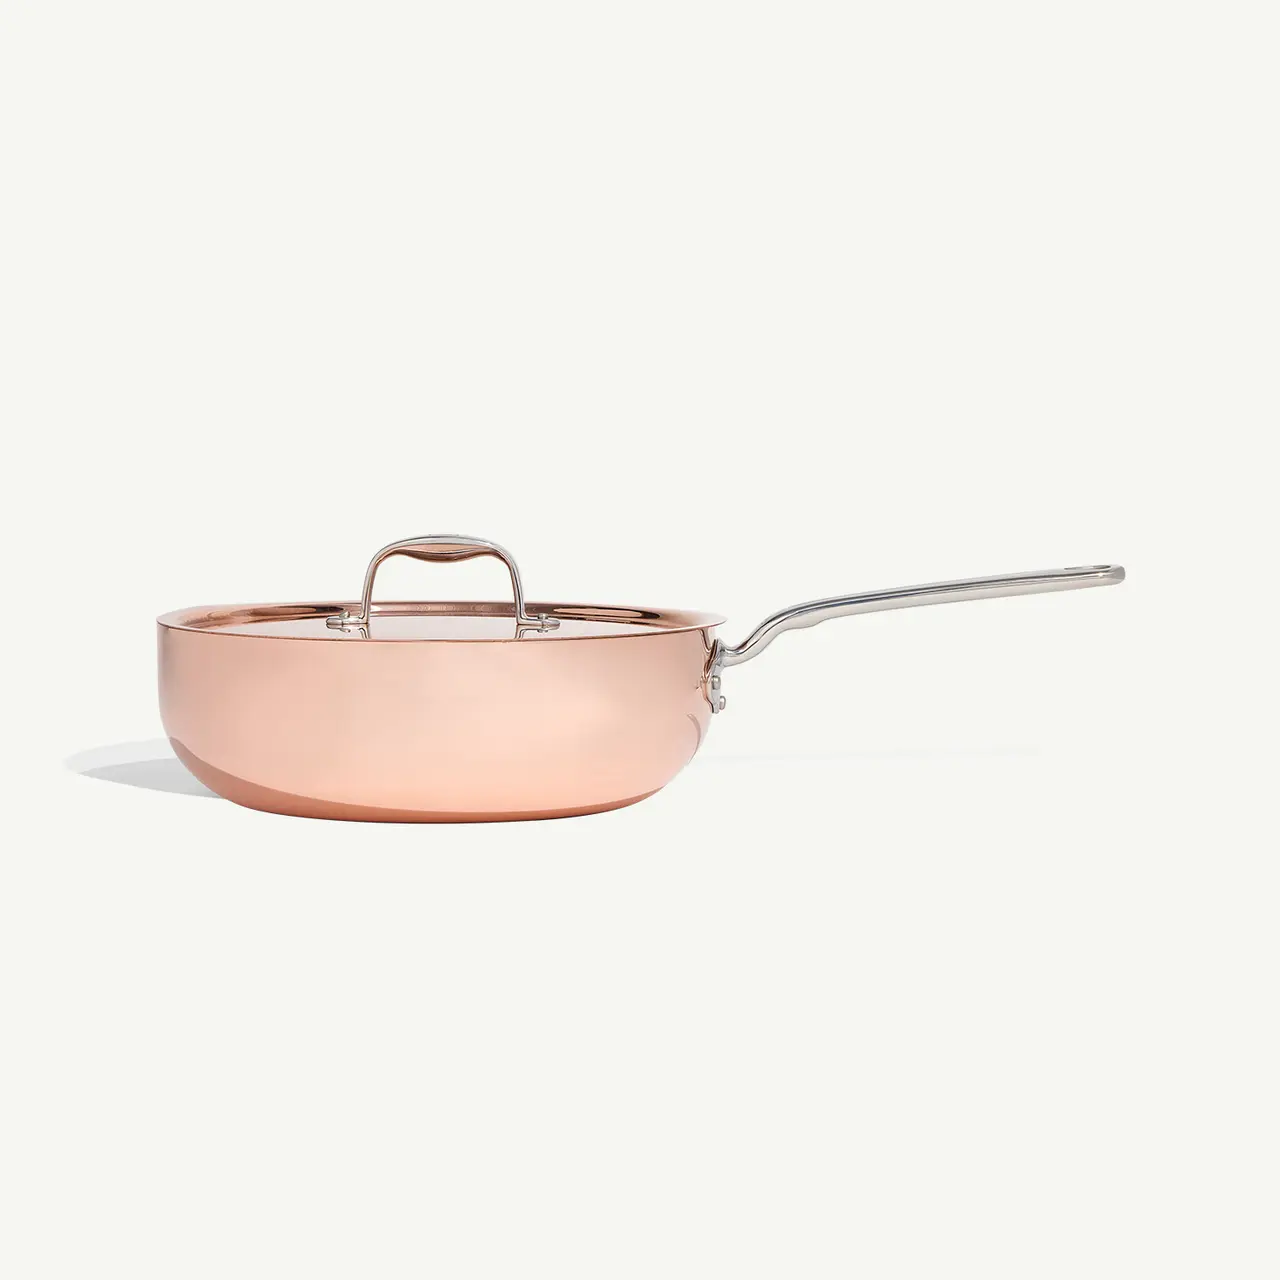 A stainless steel saucepan with a copper finish and a long handle is isolated against a white background.